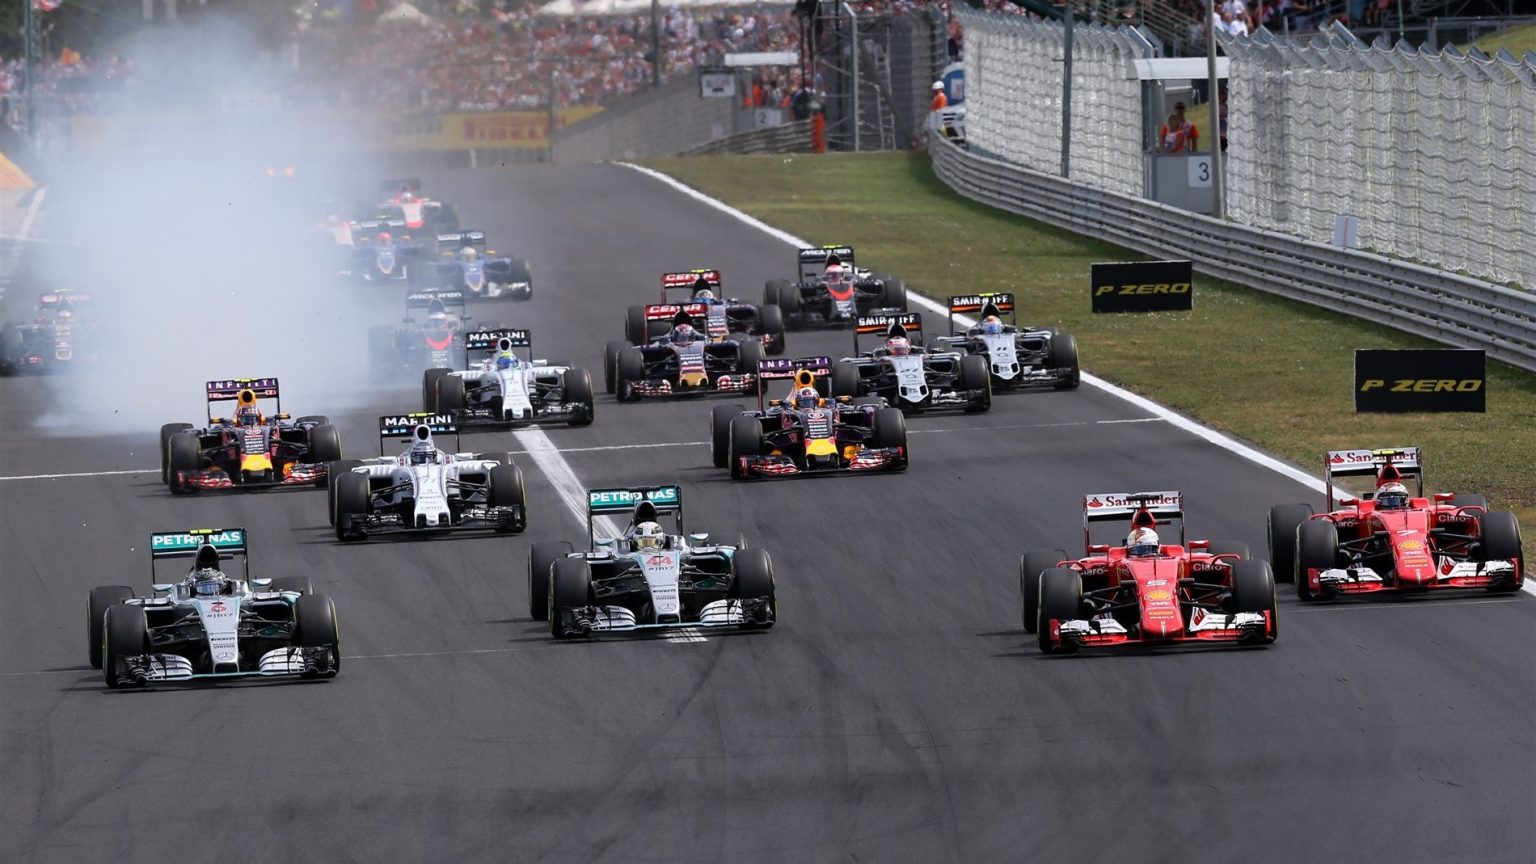 Lewis Hamilton's poor start meant he was fourth, behind Sebastian Vettel, Nico Rosberg and Kimi Raikkonen at Turn One. (Picture: Getty Images)